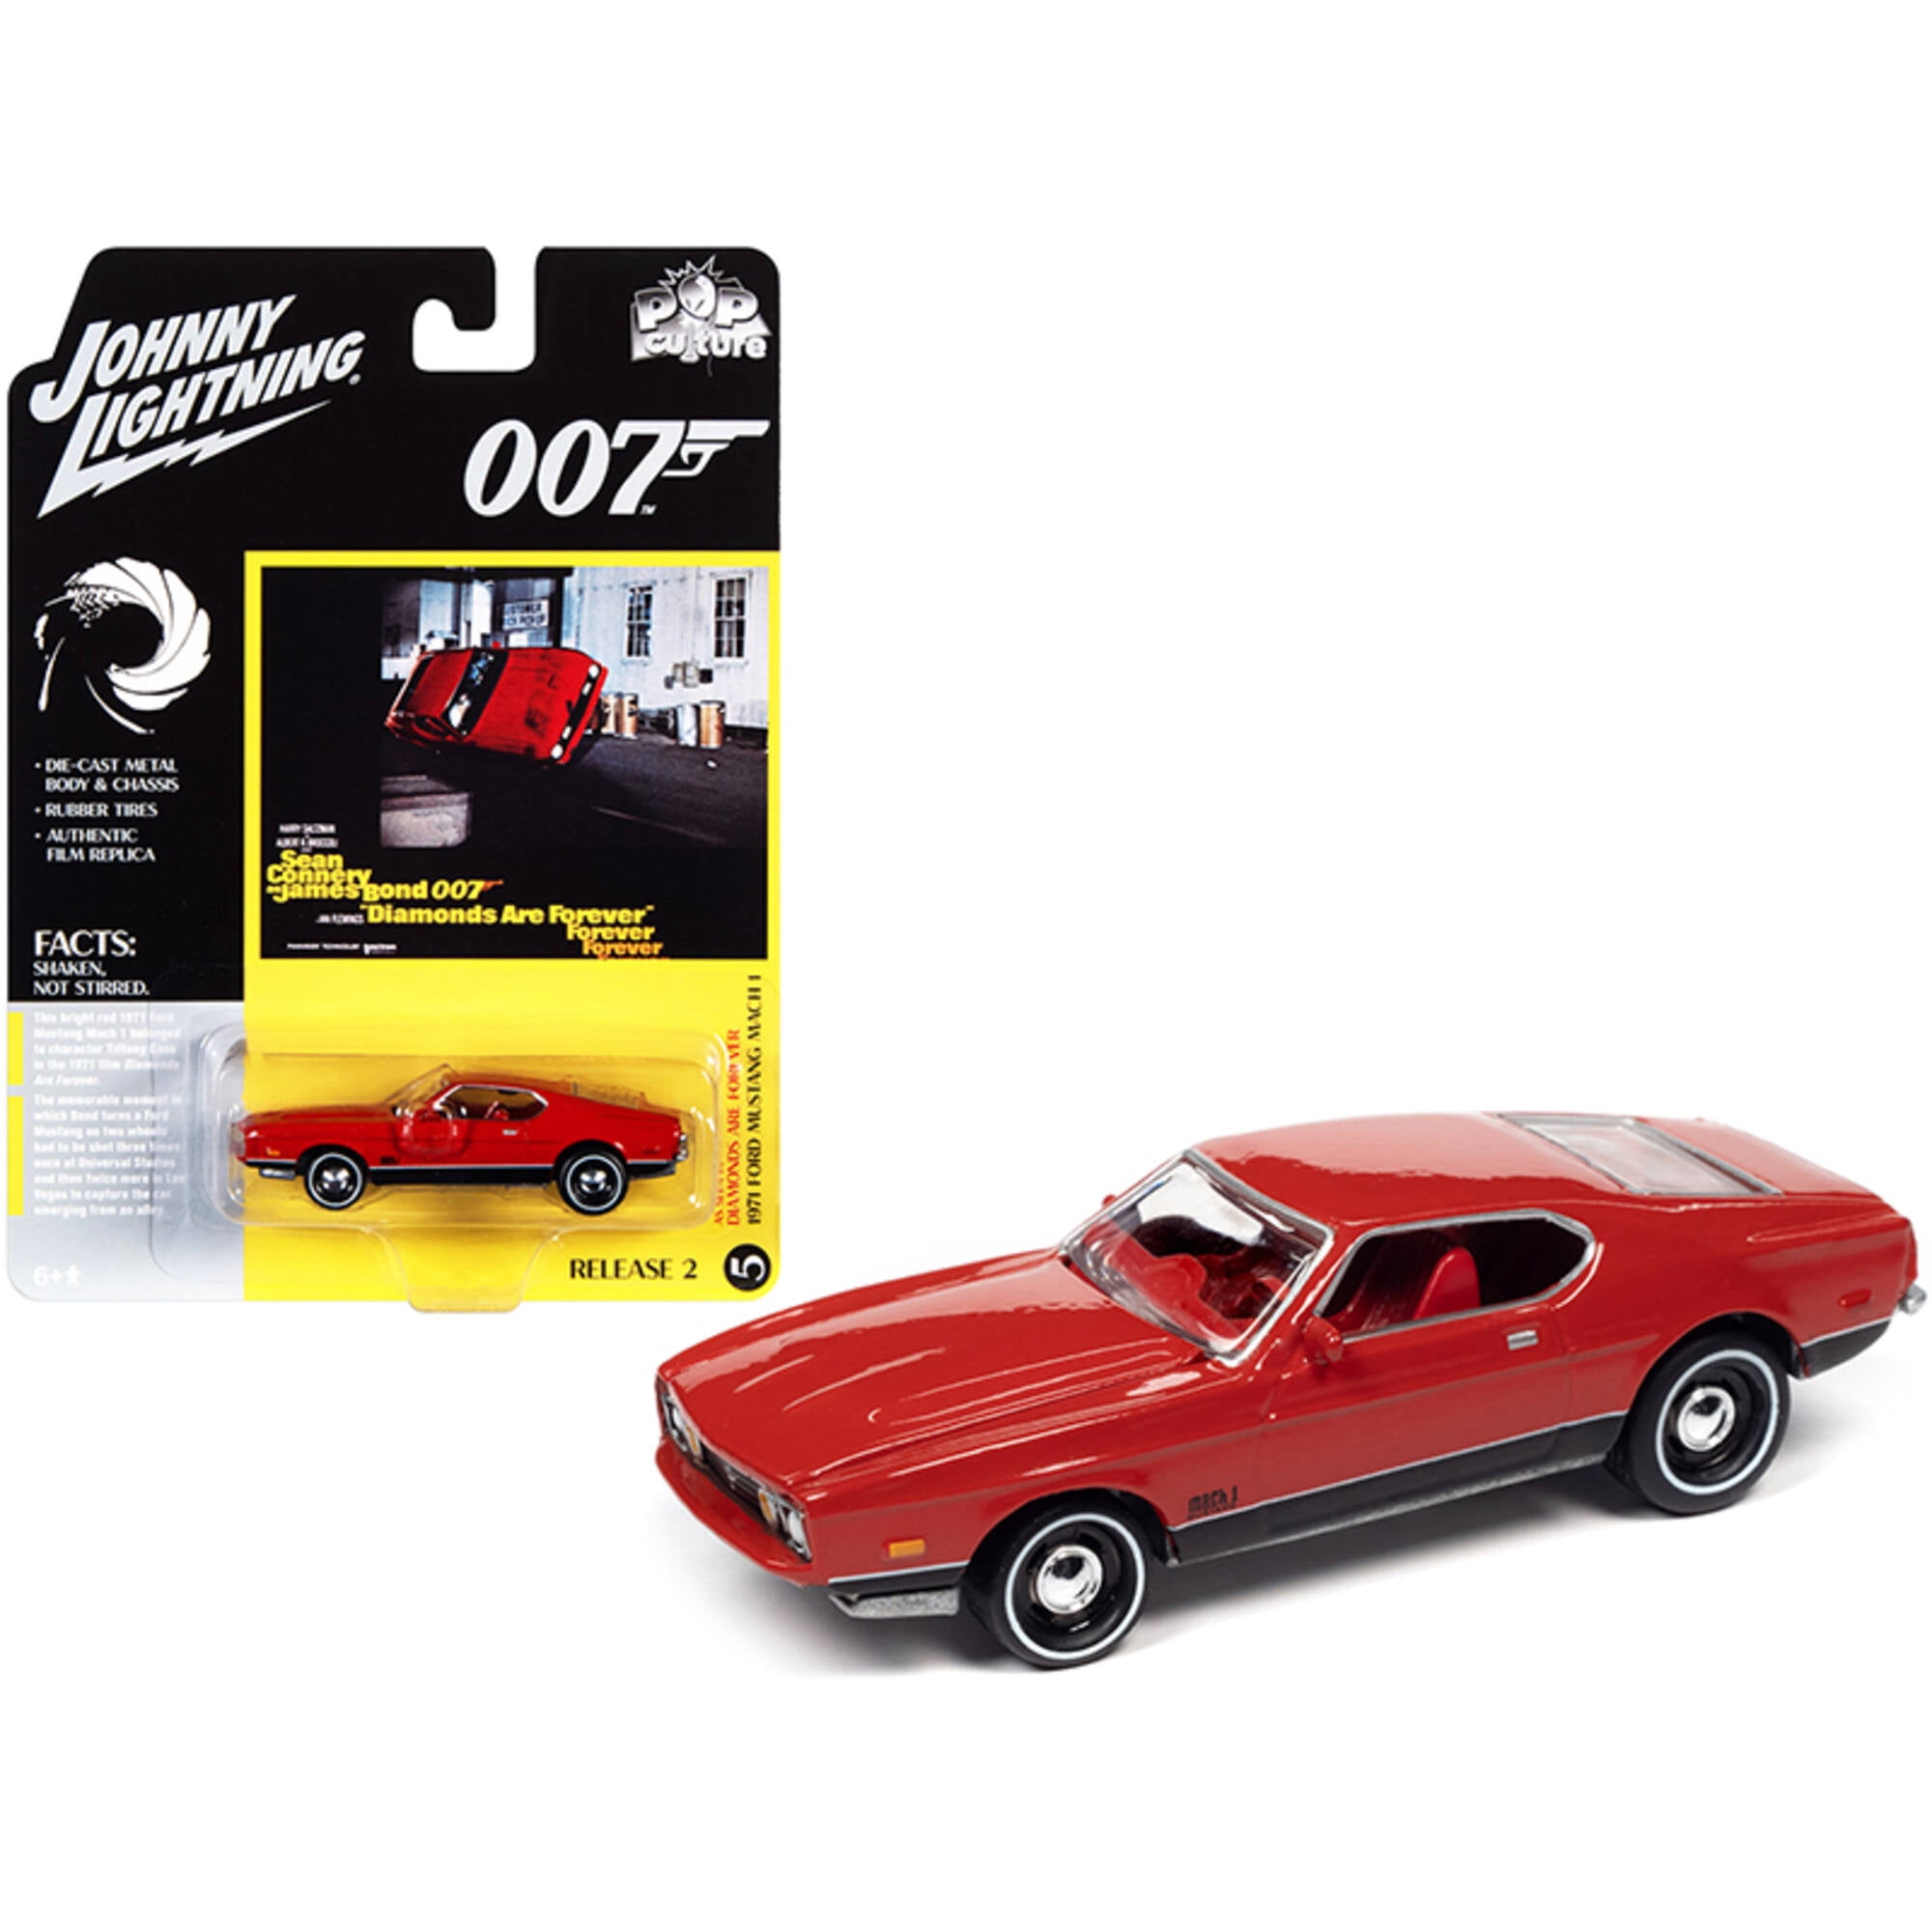 Picture of Johnny Lightning JLPC002-JLSP126 Series 0.16 4 Diecast Model Car for 1971 Ford Mustang Mach 1 Bright Red with Black Bottom James Bond 007 Diamonds Are Forever 1971 Movie Pop Culture